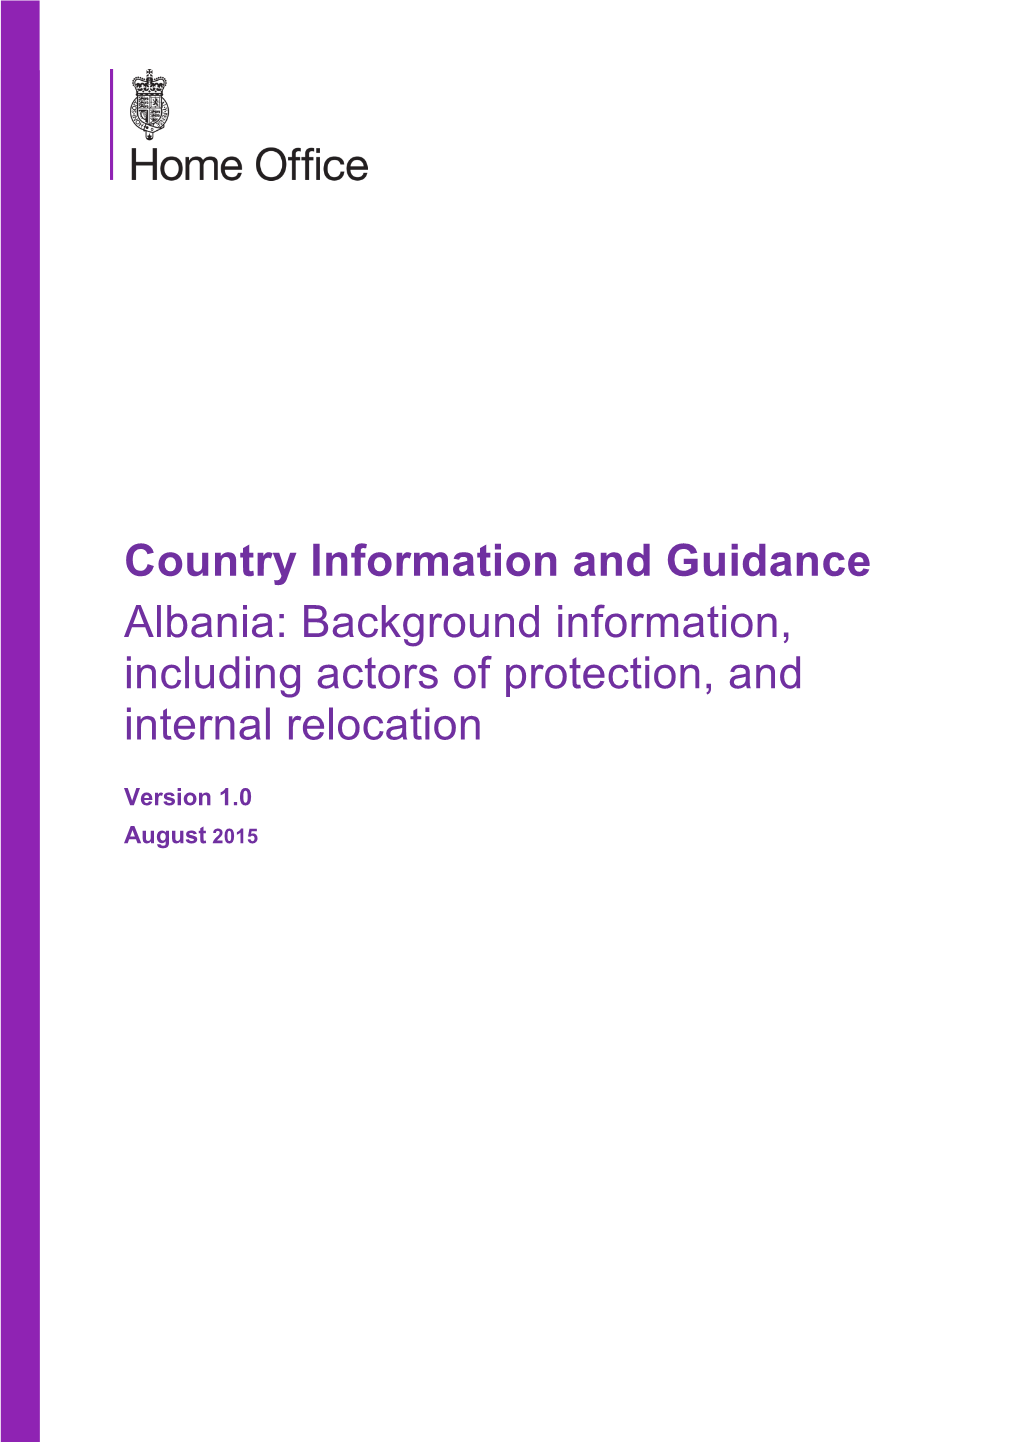 Country Information and Guidance Albania: Background Information, Including Actors of Protection, and Internal Relocation